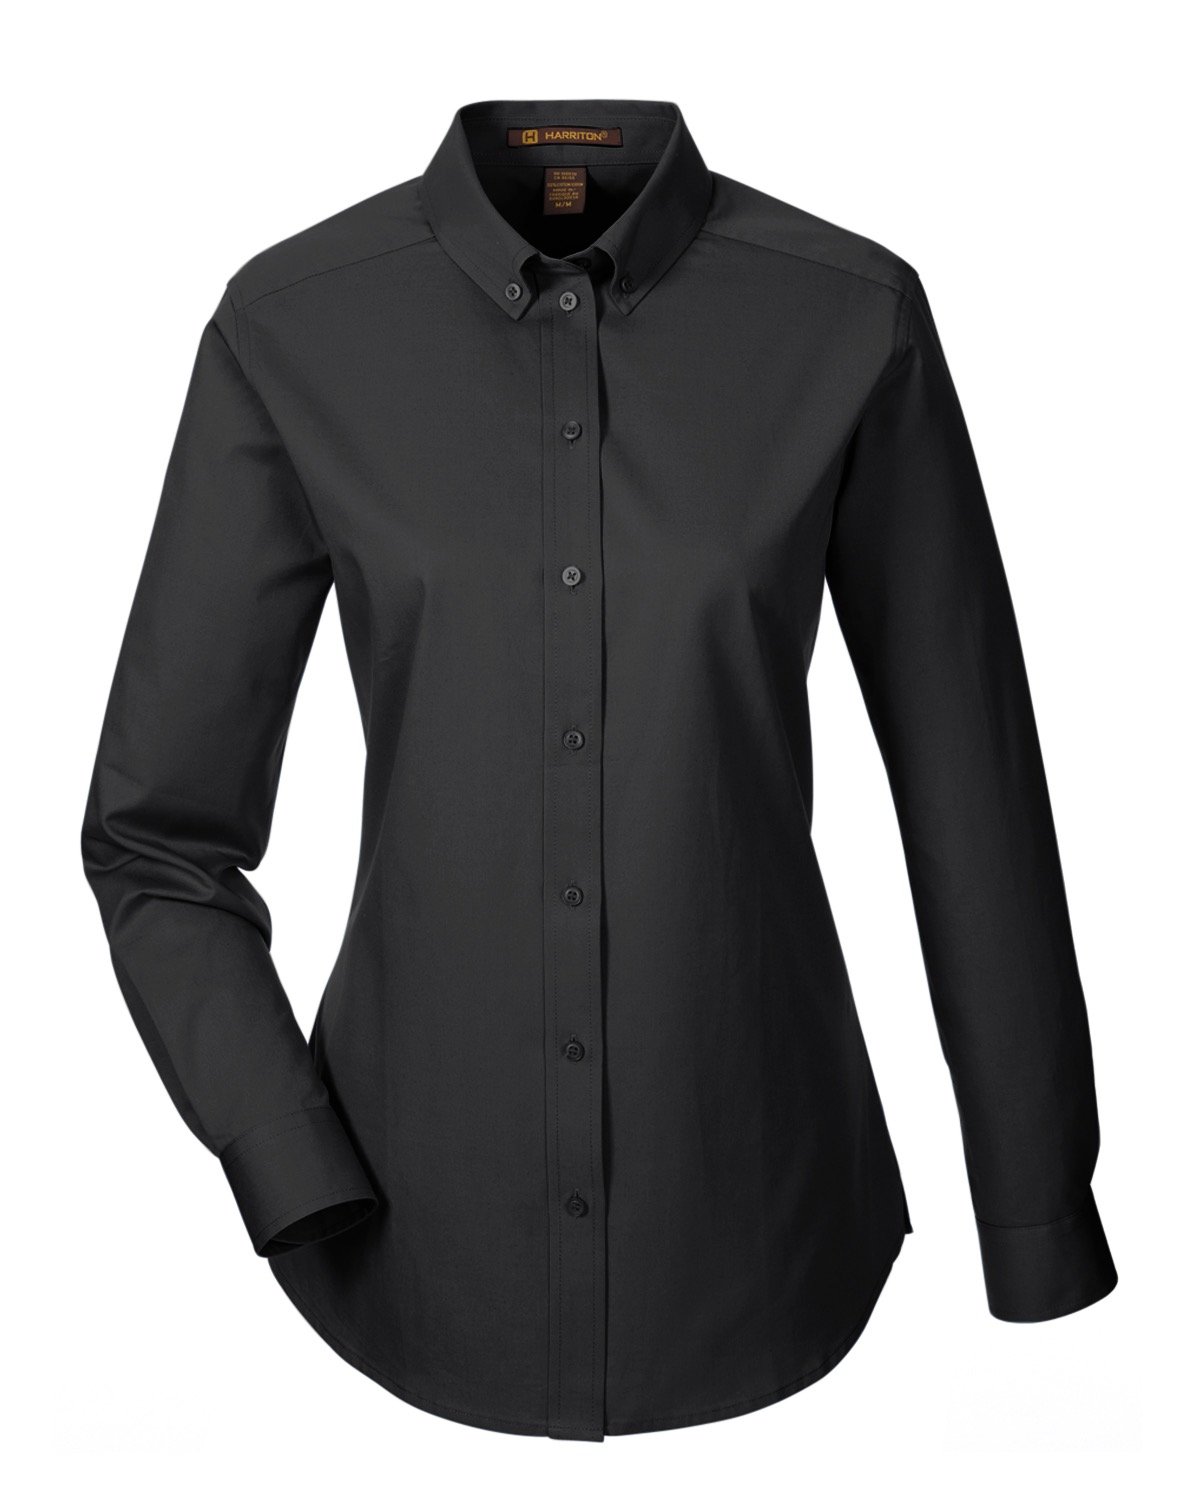 Picture of Harriton Ladies' Foundation 100% Cotton Long-Sleeve Twill Shirt with Teflon